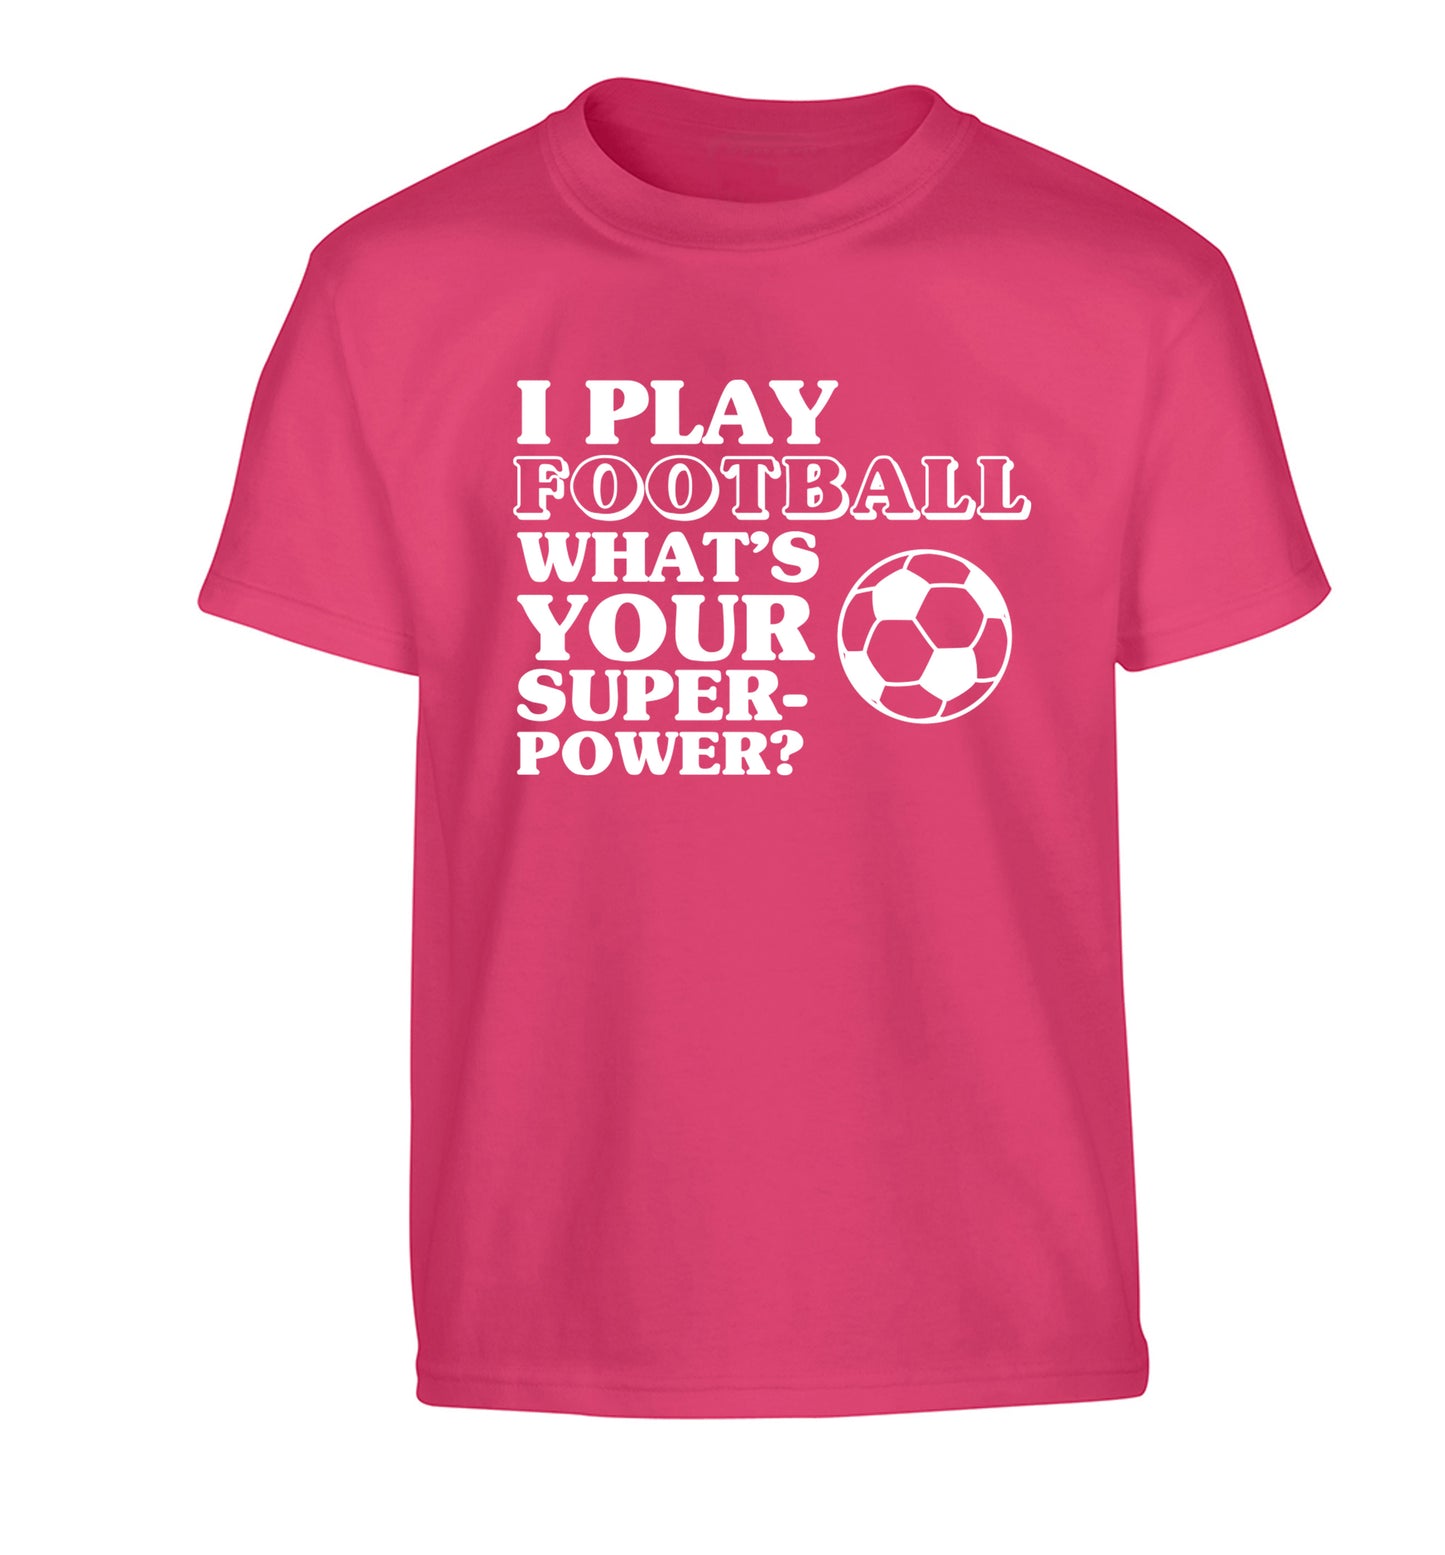 I play football what's your superpower? Children's pink Tshirt 12-14 Years